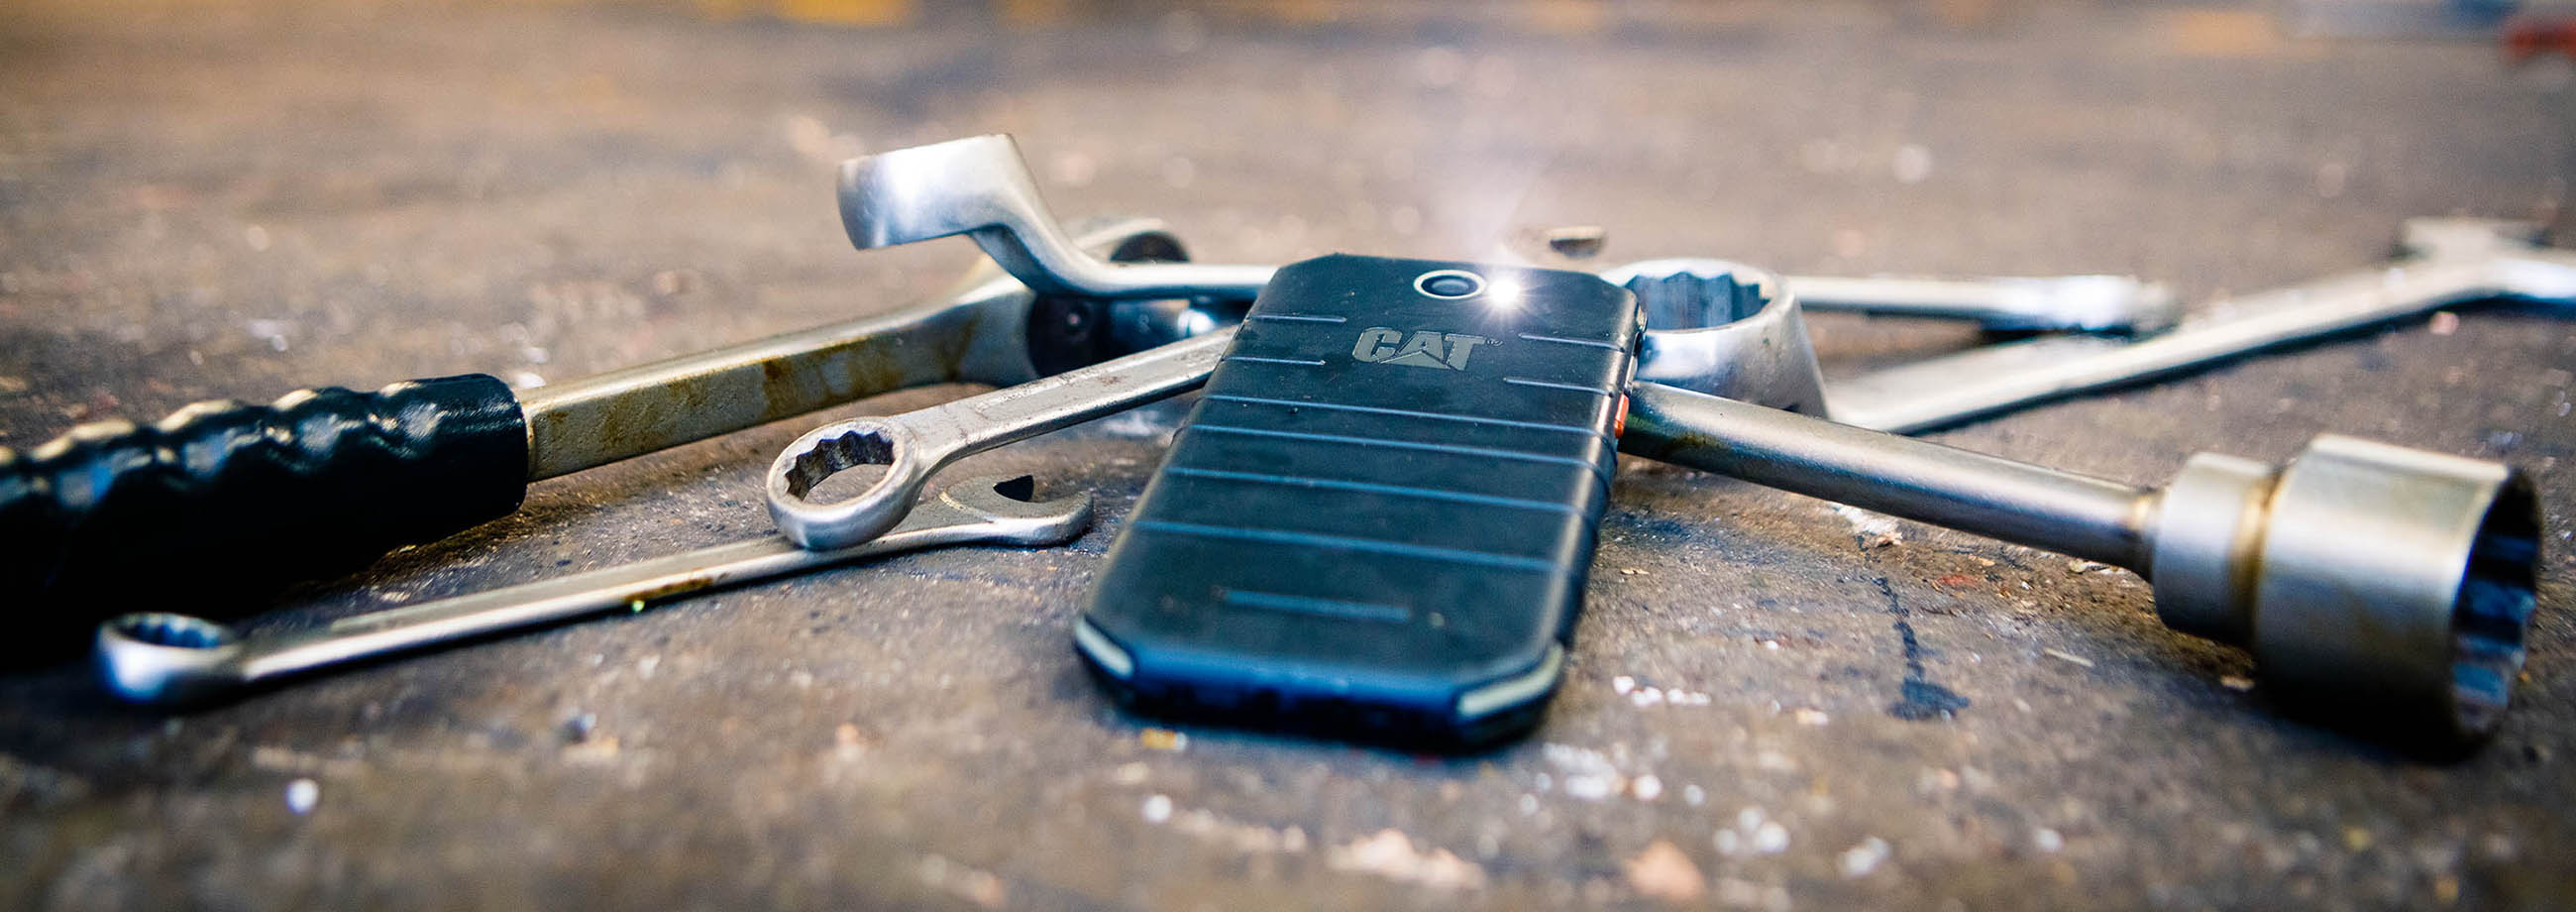 Built to Survive the New Rugged Cat   S31  Smartphone